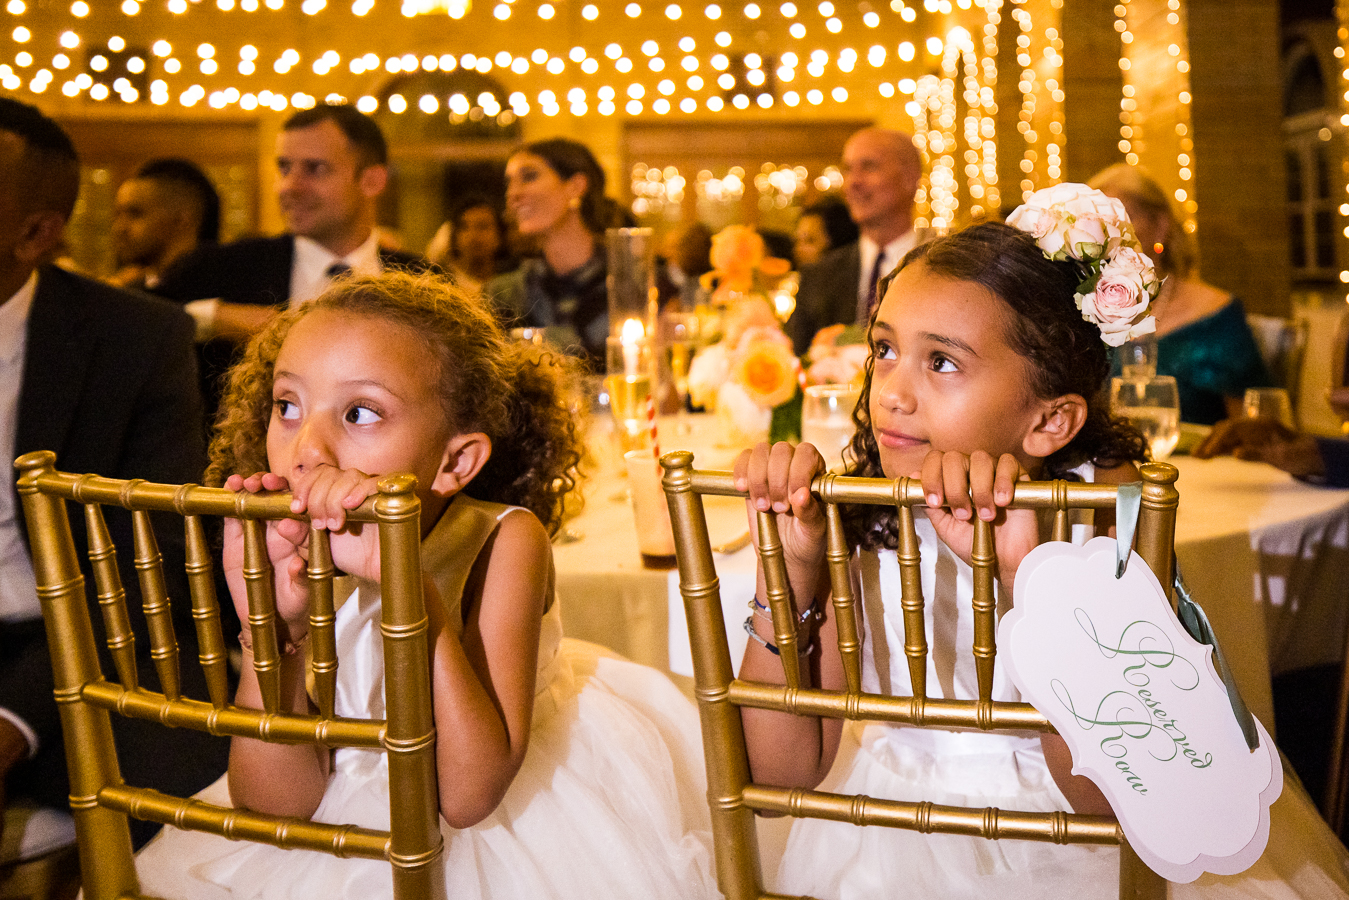 candid wedding photographer, lisa rhinehart, captures this image of the flower girls as they watch the groom and his Ethiopian bride share their first dance together during this multicultural wedding reception at st francis hall in dc